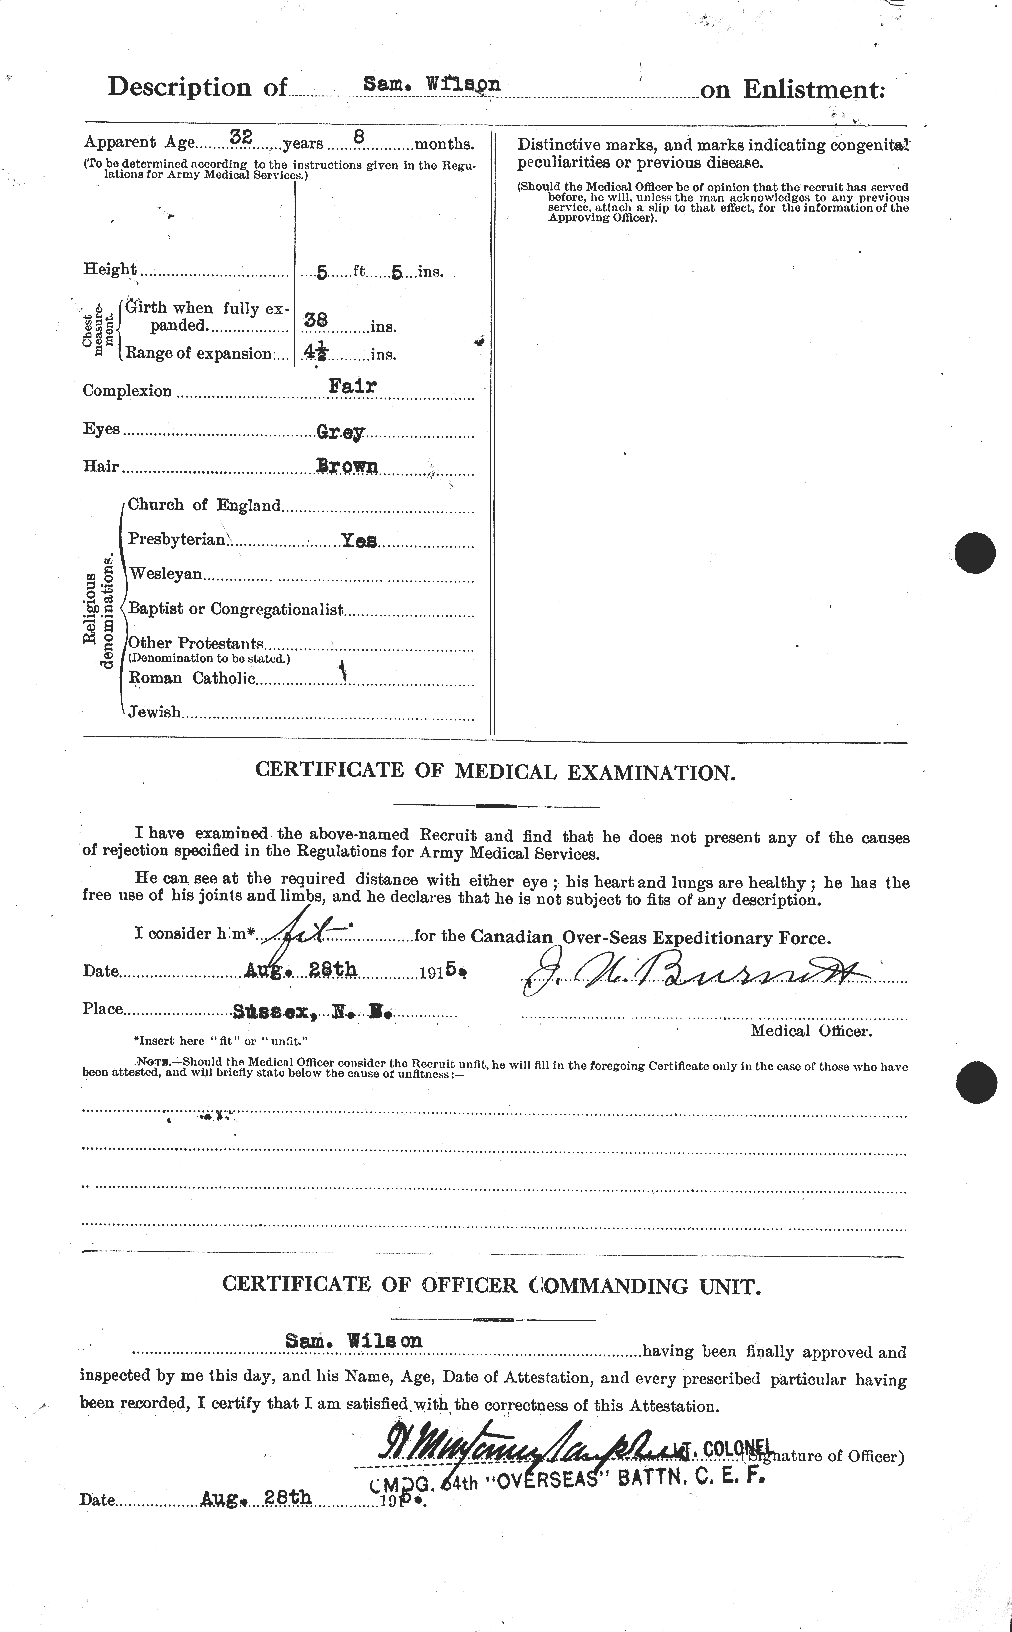 Personnel Records of the First World War - CEF 681088b